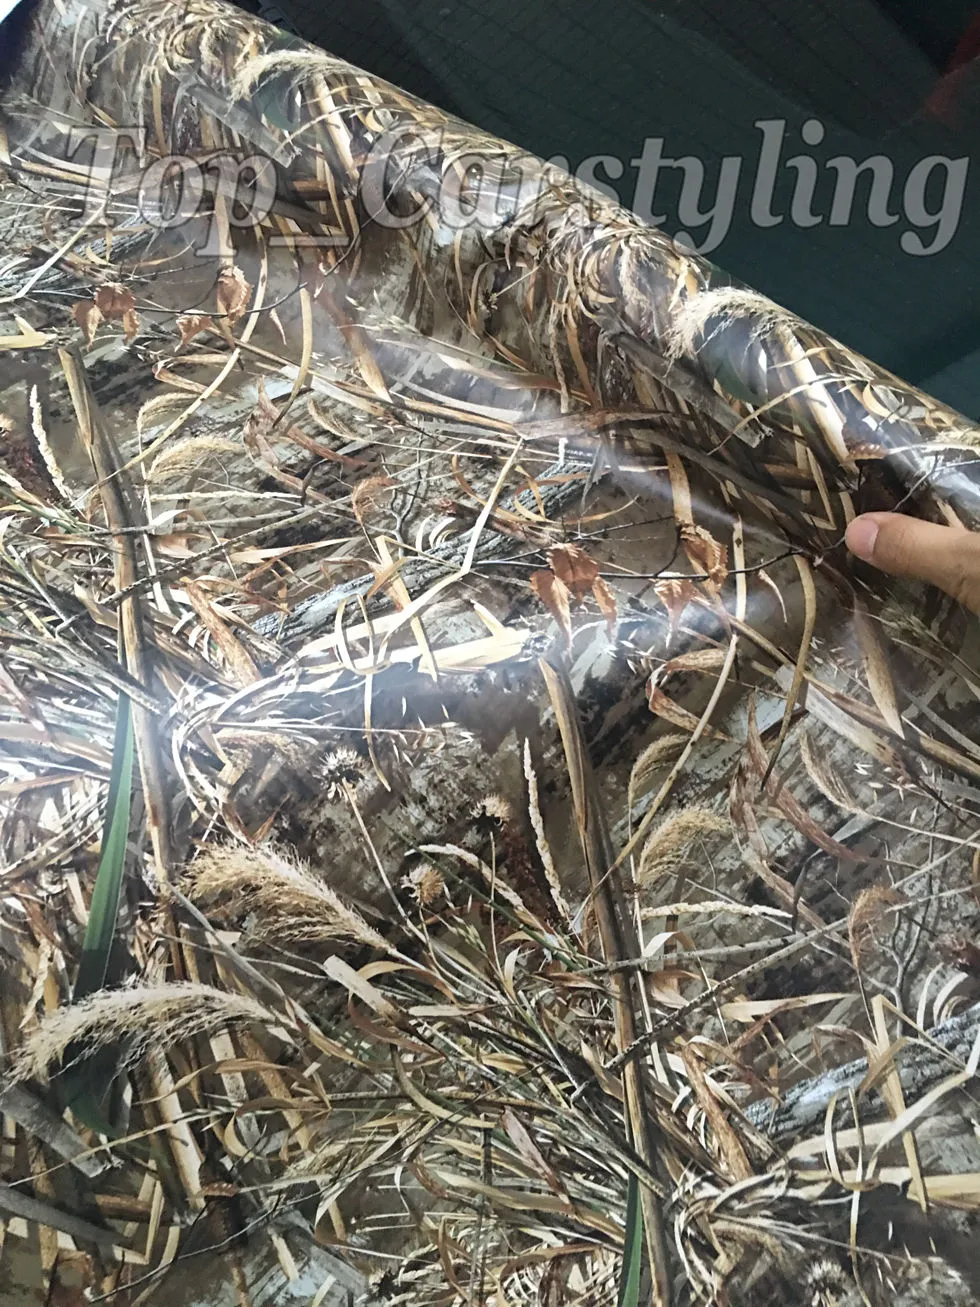 Realtree Camo Vinyl wrap Grass leaf camouflage Mossy Oak Car wrap Film foil for Vehicle skin styling covering stickers7984871